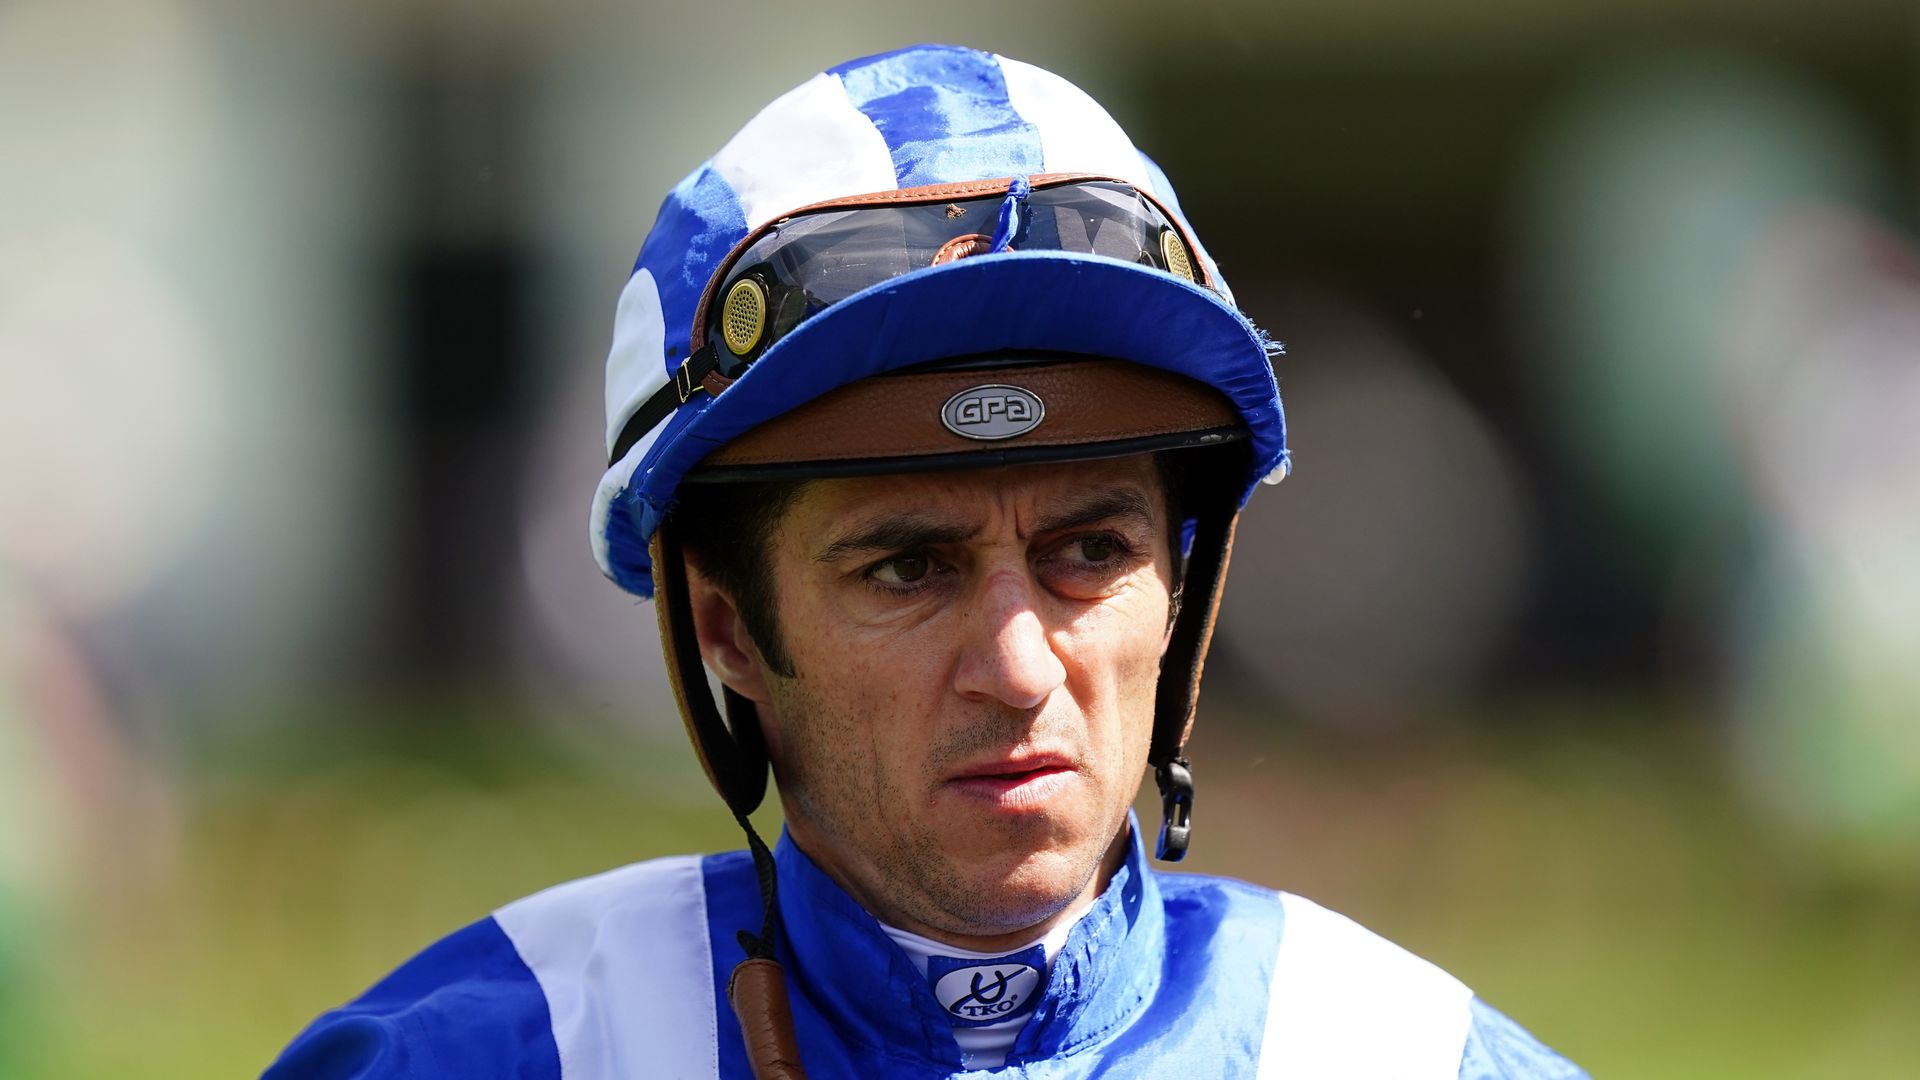 Christophe Soumillon: Jockey banned for 2 months for elbowing Rossa